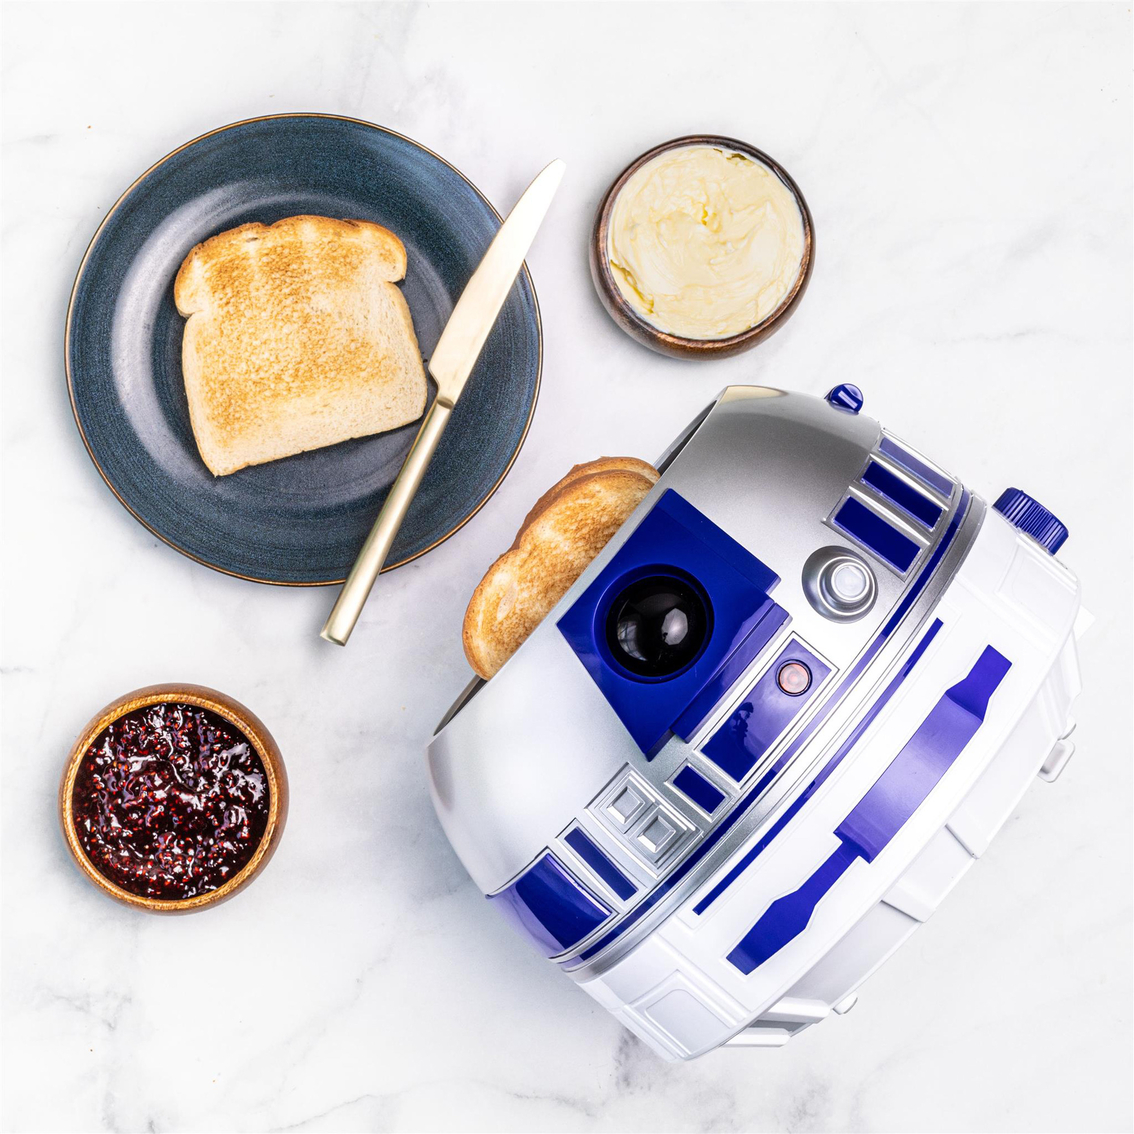 Star Wars R2-D2 Deluxe Toaster - Image 6 of 6